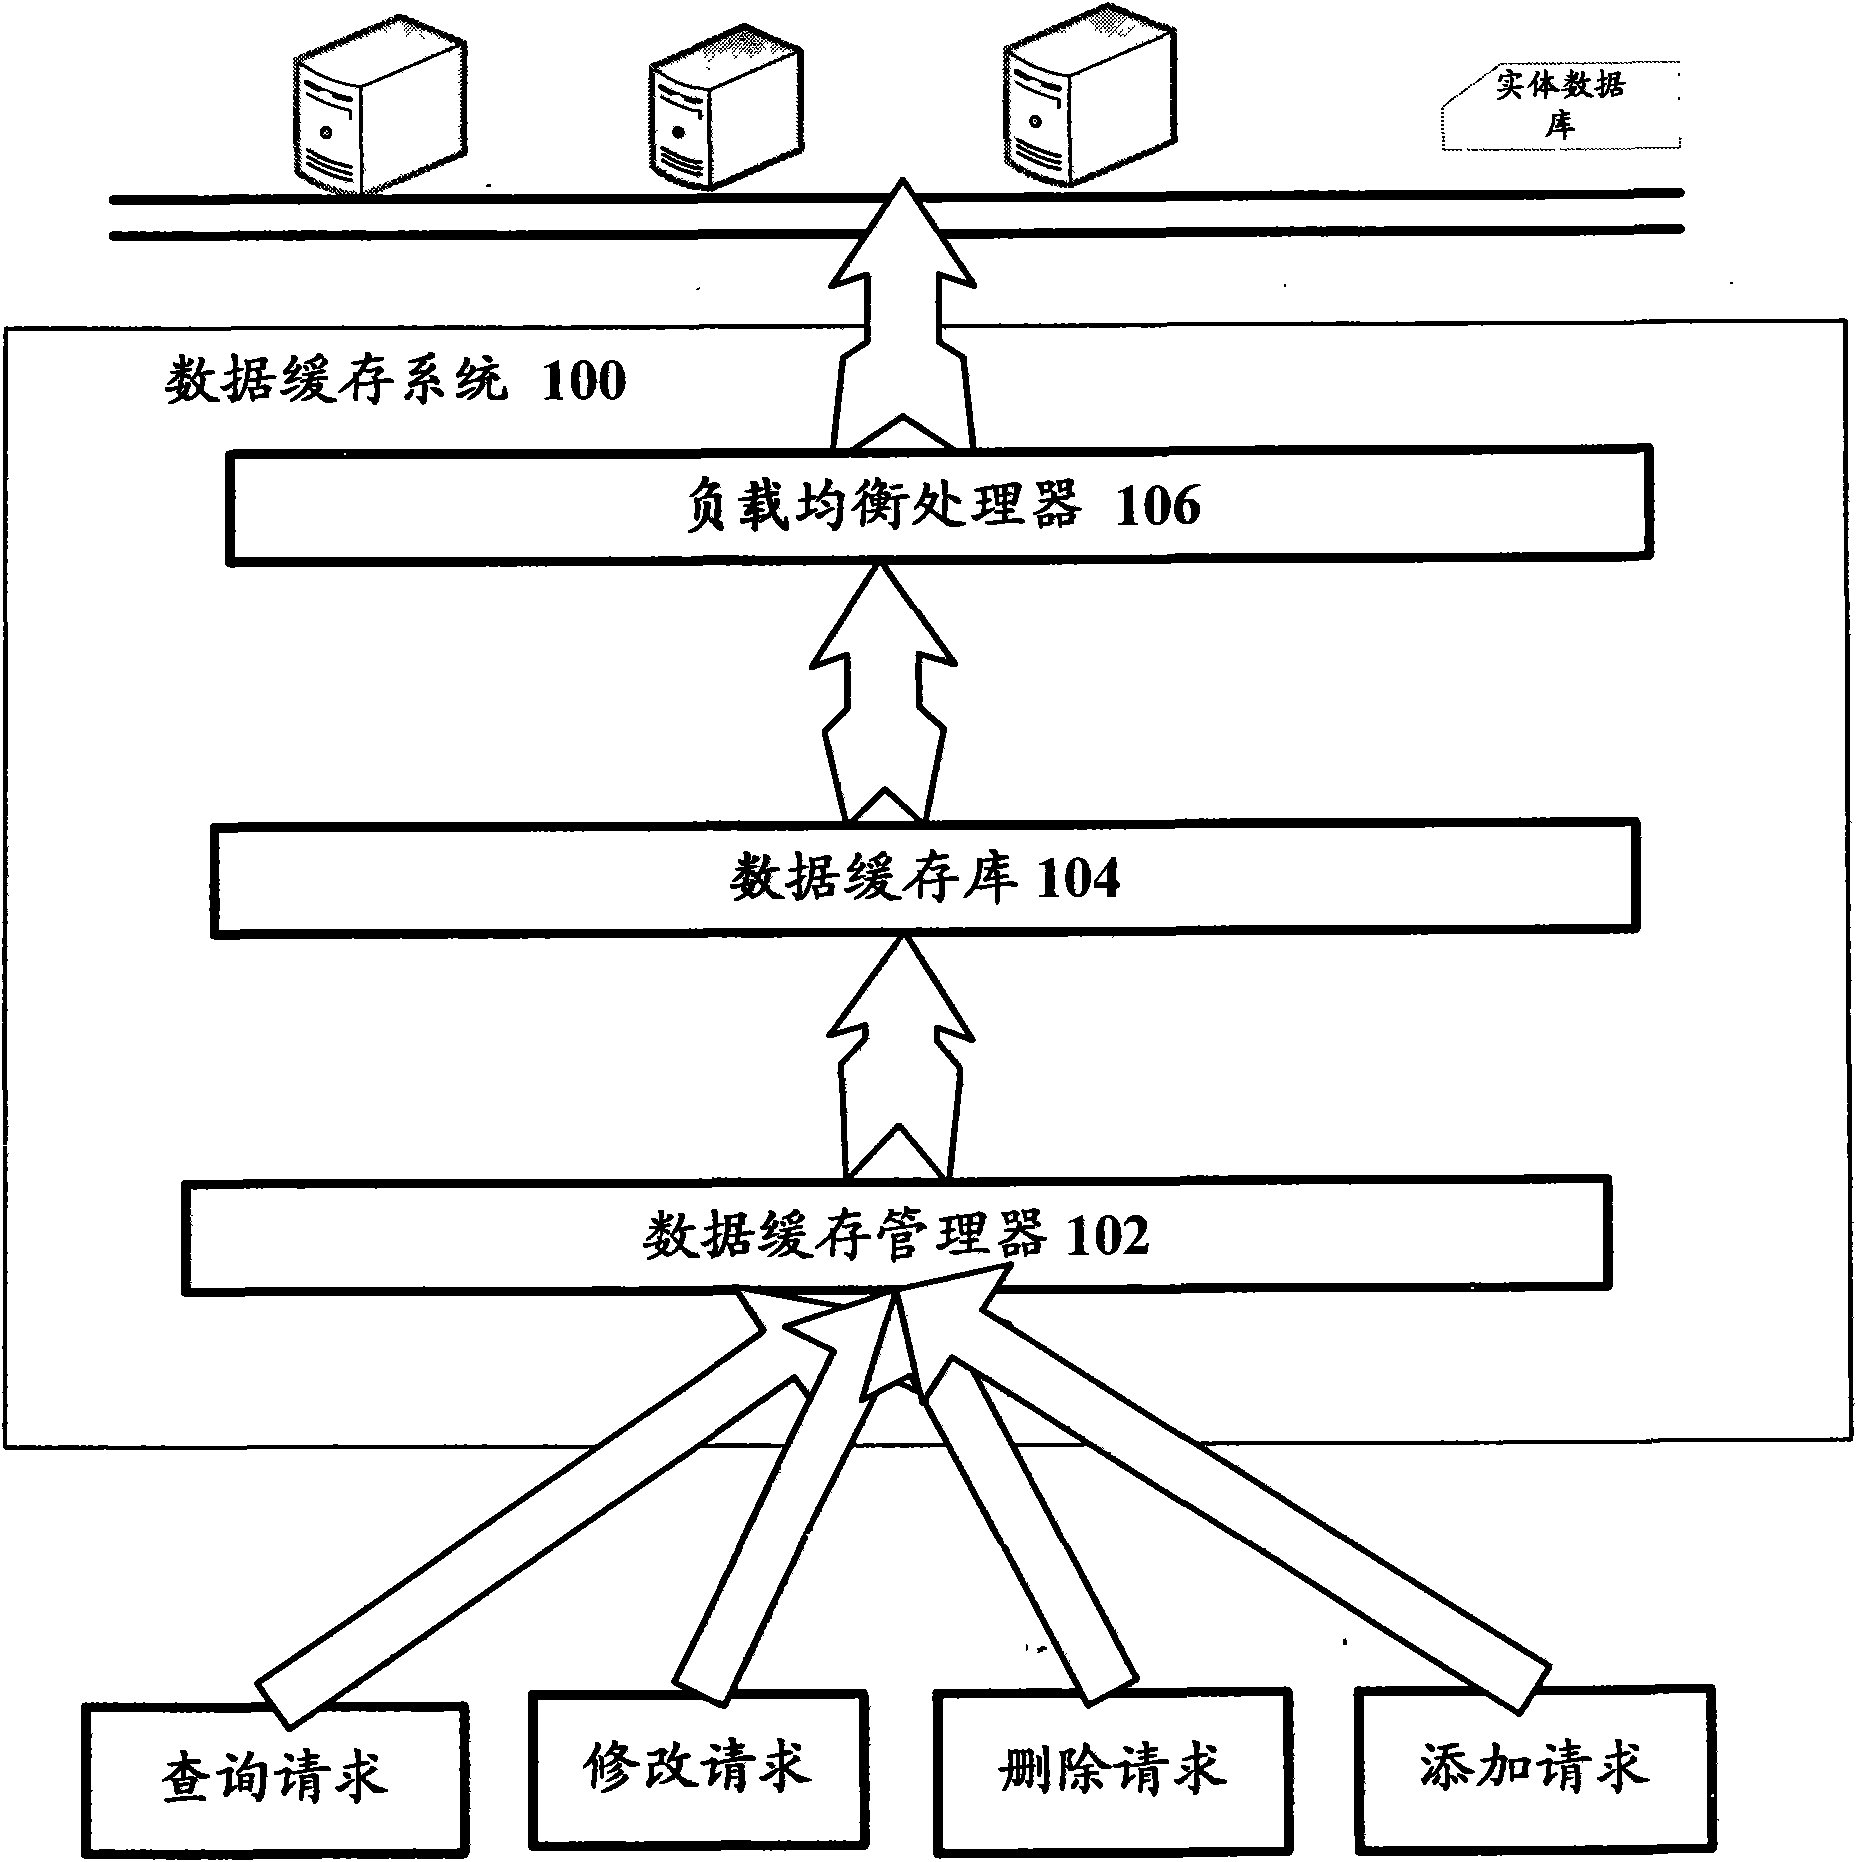 Data buffering system with load balancing function